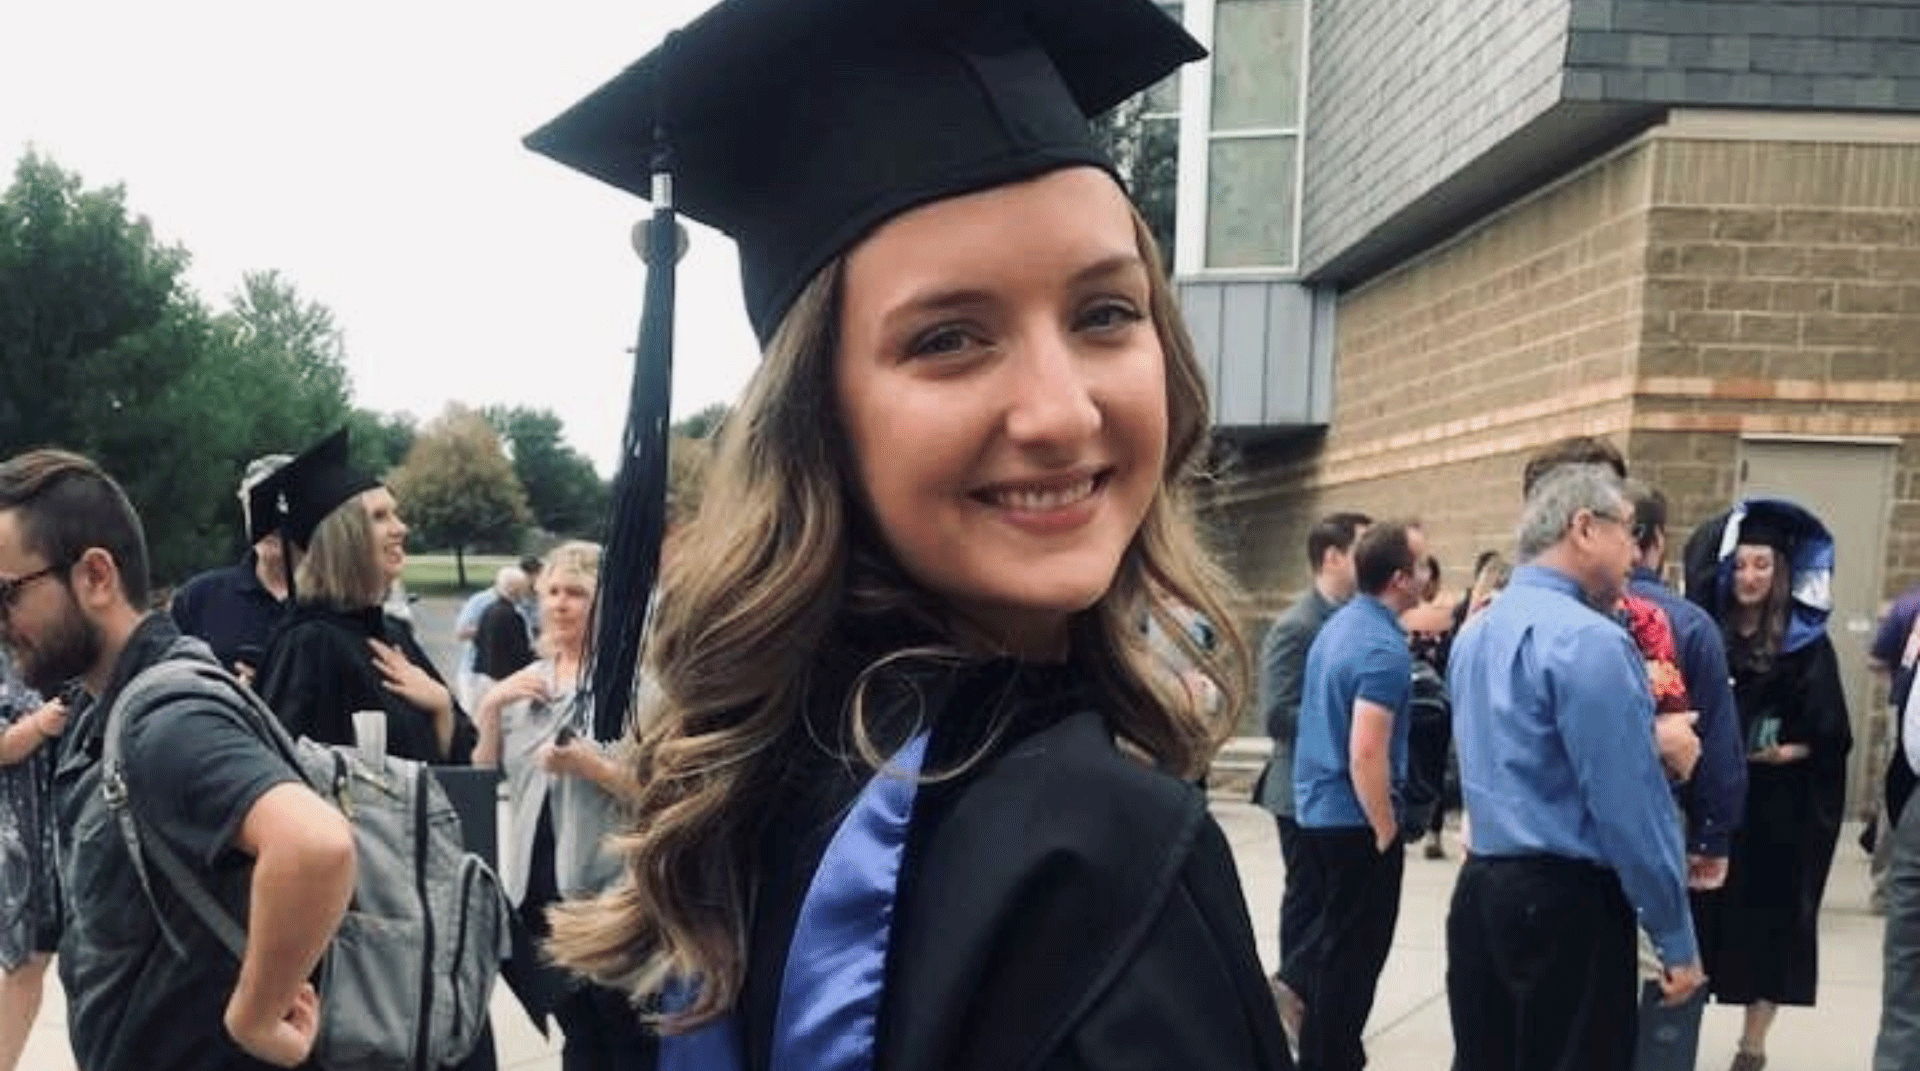 Nebraska Methodist College alumna Andrea Tesarek smiles while wearing her graduation gown and cap after graduating with a master's in occupational therapy.